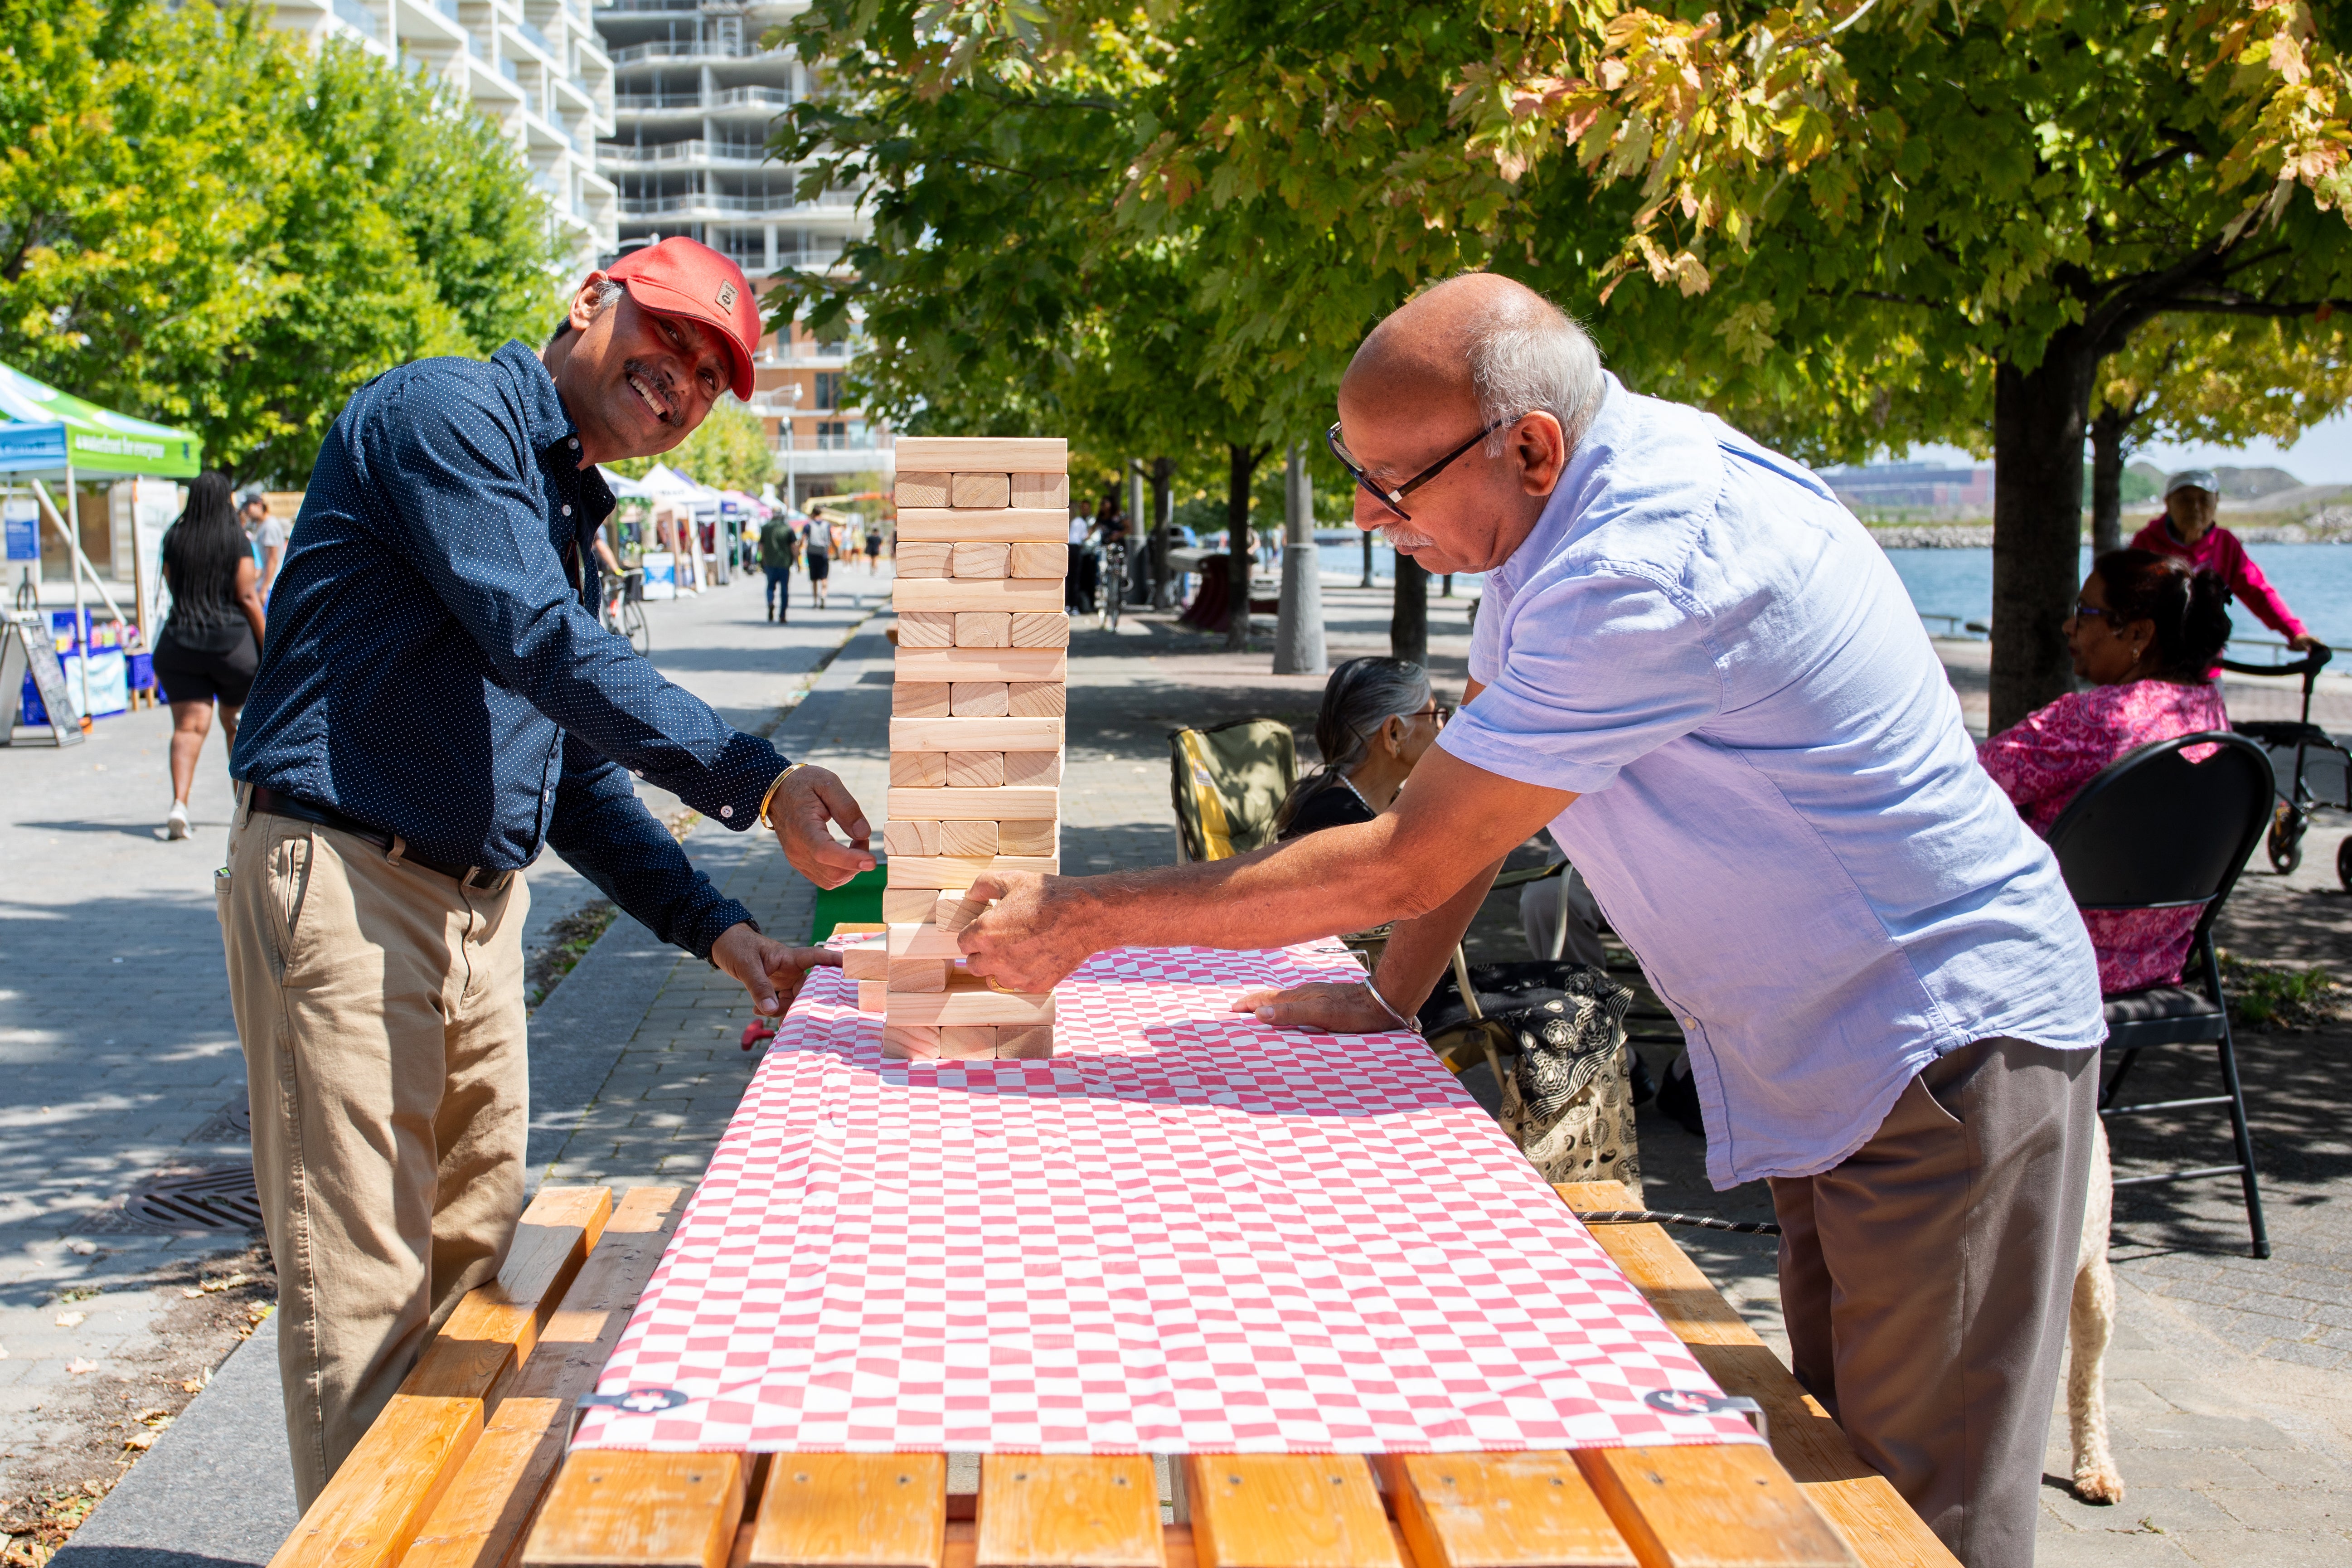 Two people play an interactive game on the waterfront.